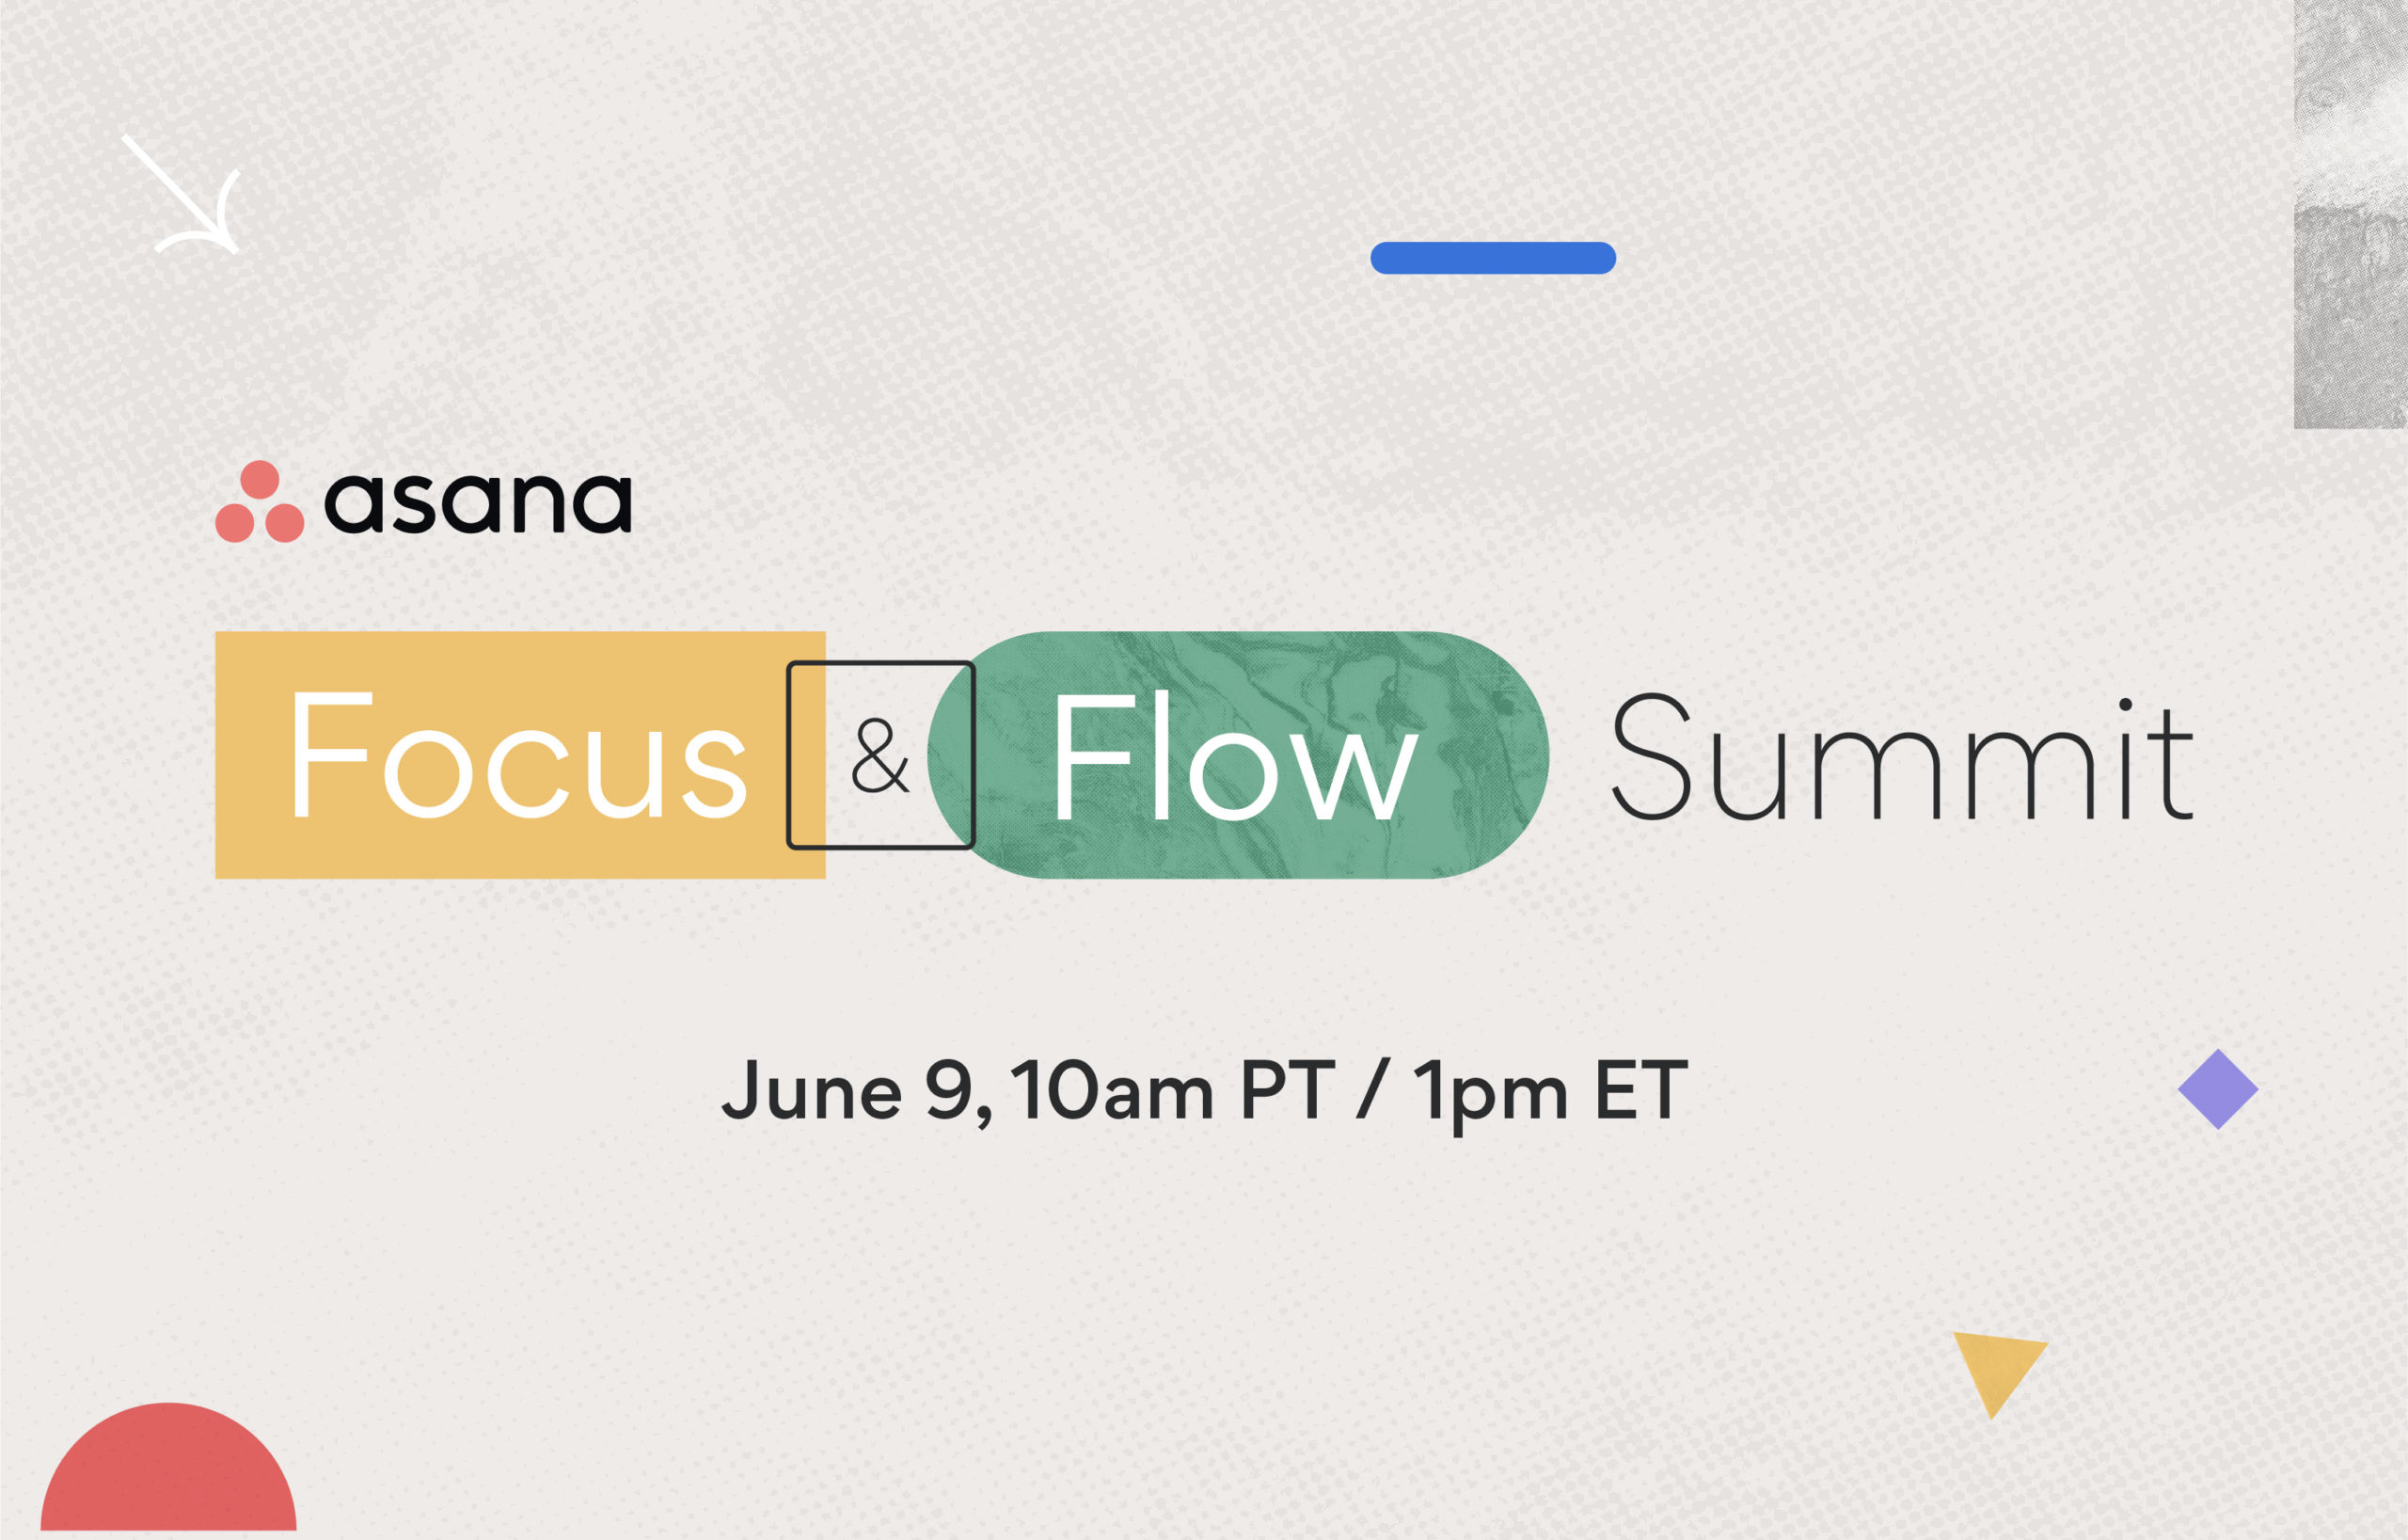 Focus & Flow Summit: Join our event June 9th The Blog